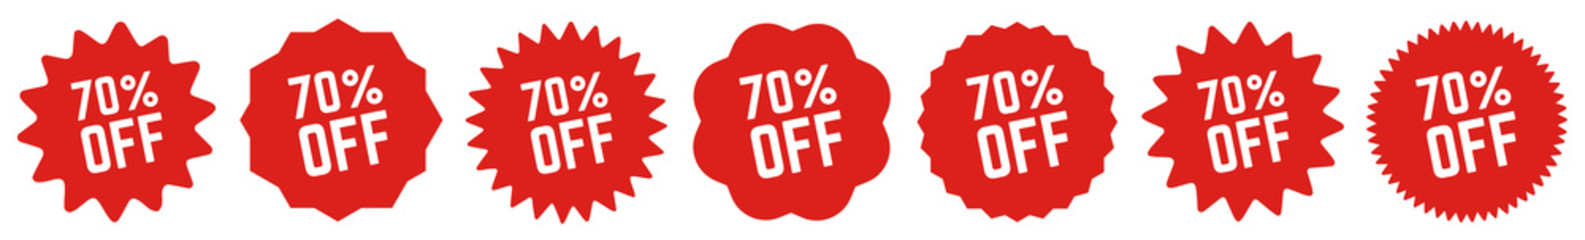 70 Percent OFF Discount Tag Red | Special Offer Icon | Sale Sticker | Deal Label | Variations